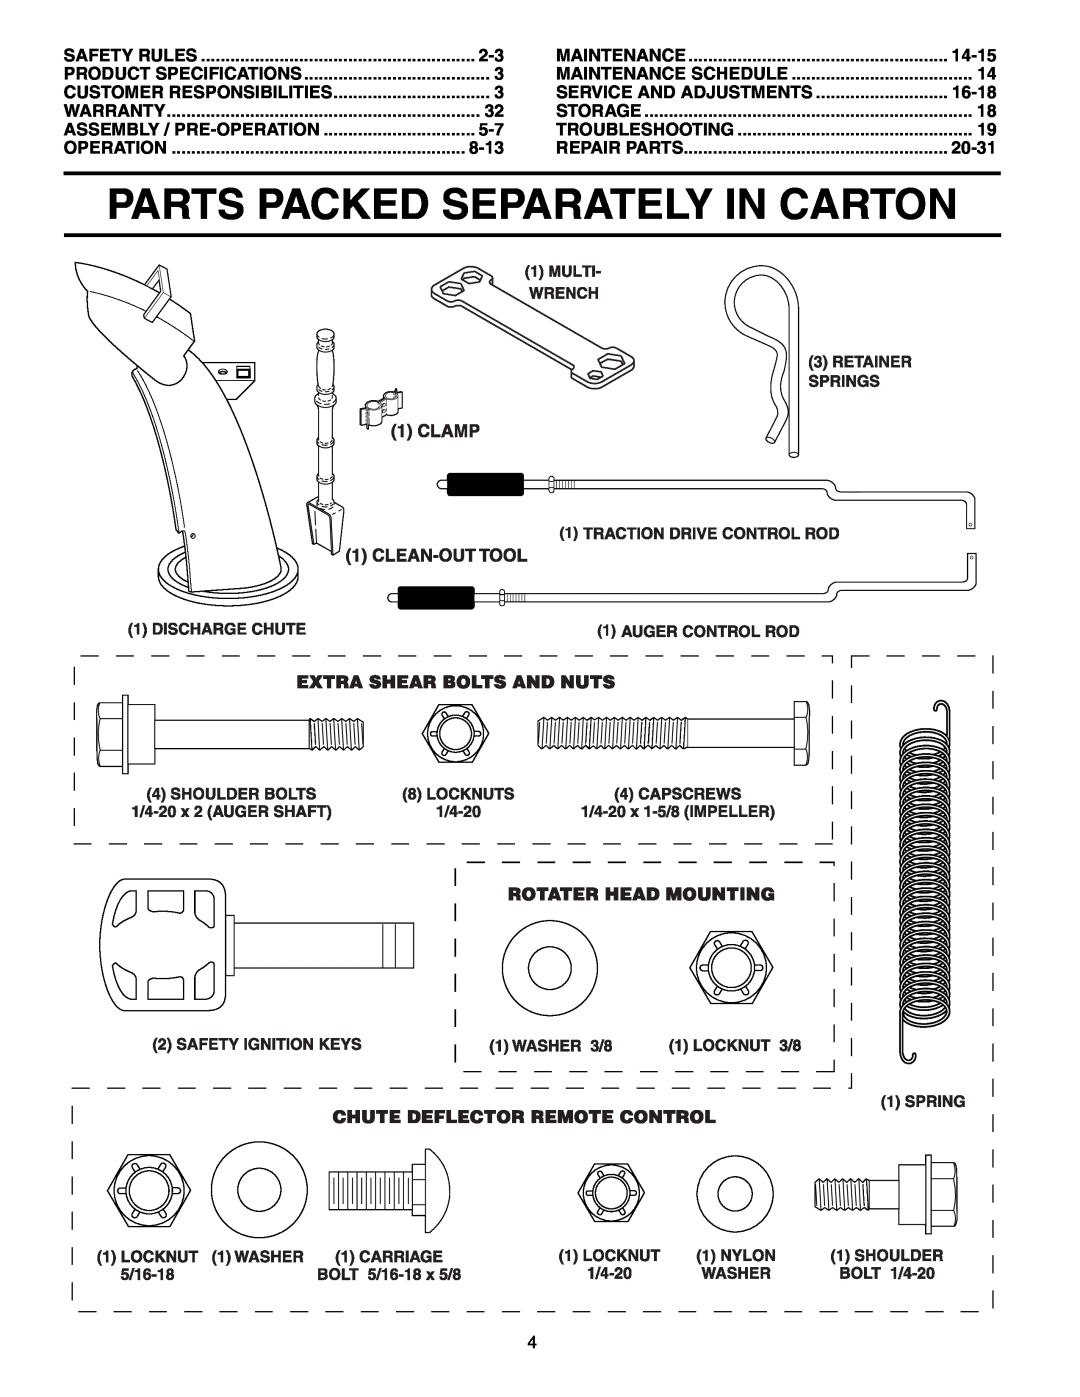 Poulan 192044 owner manual Parts Packed Separately In Carton, 8-13, 14-15, Service And Adjustments, 16-18, 20-31 